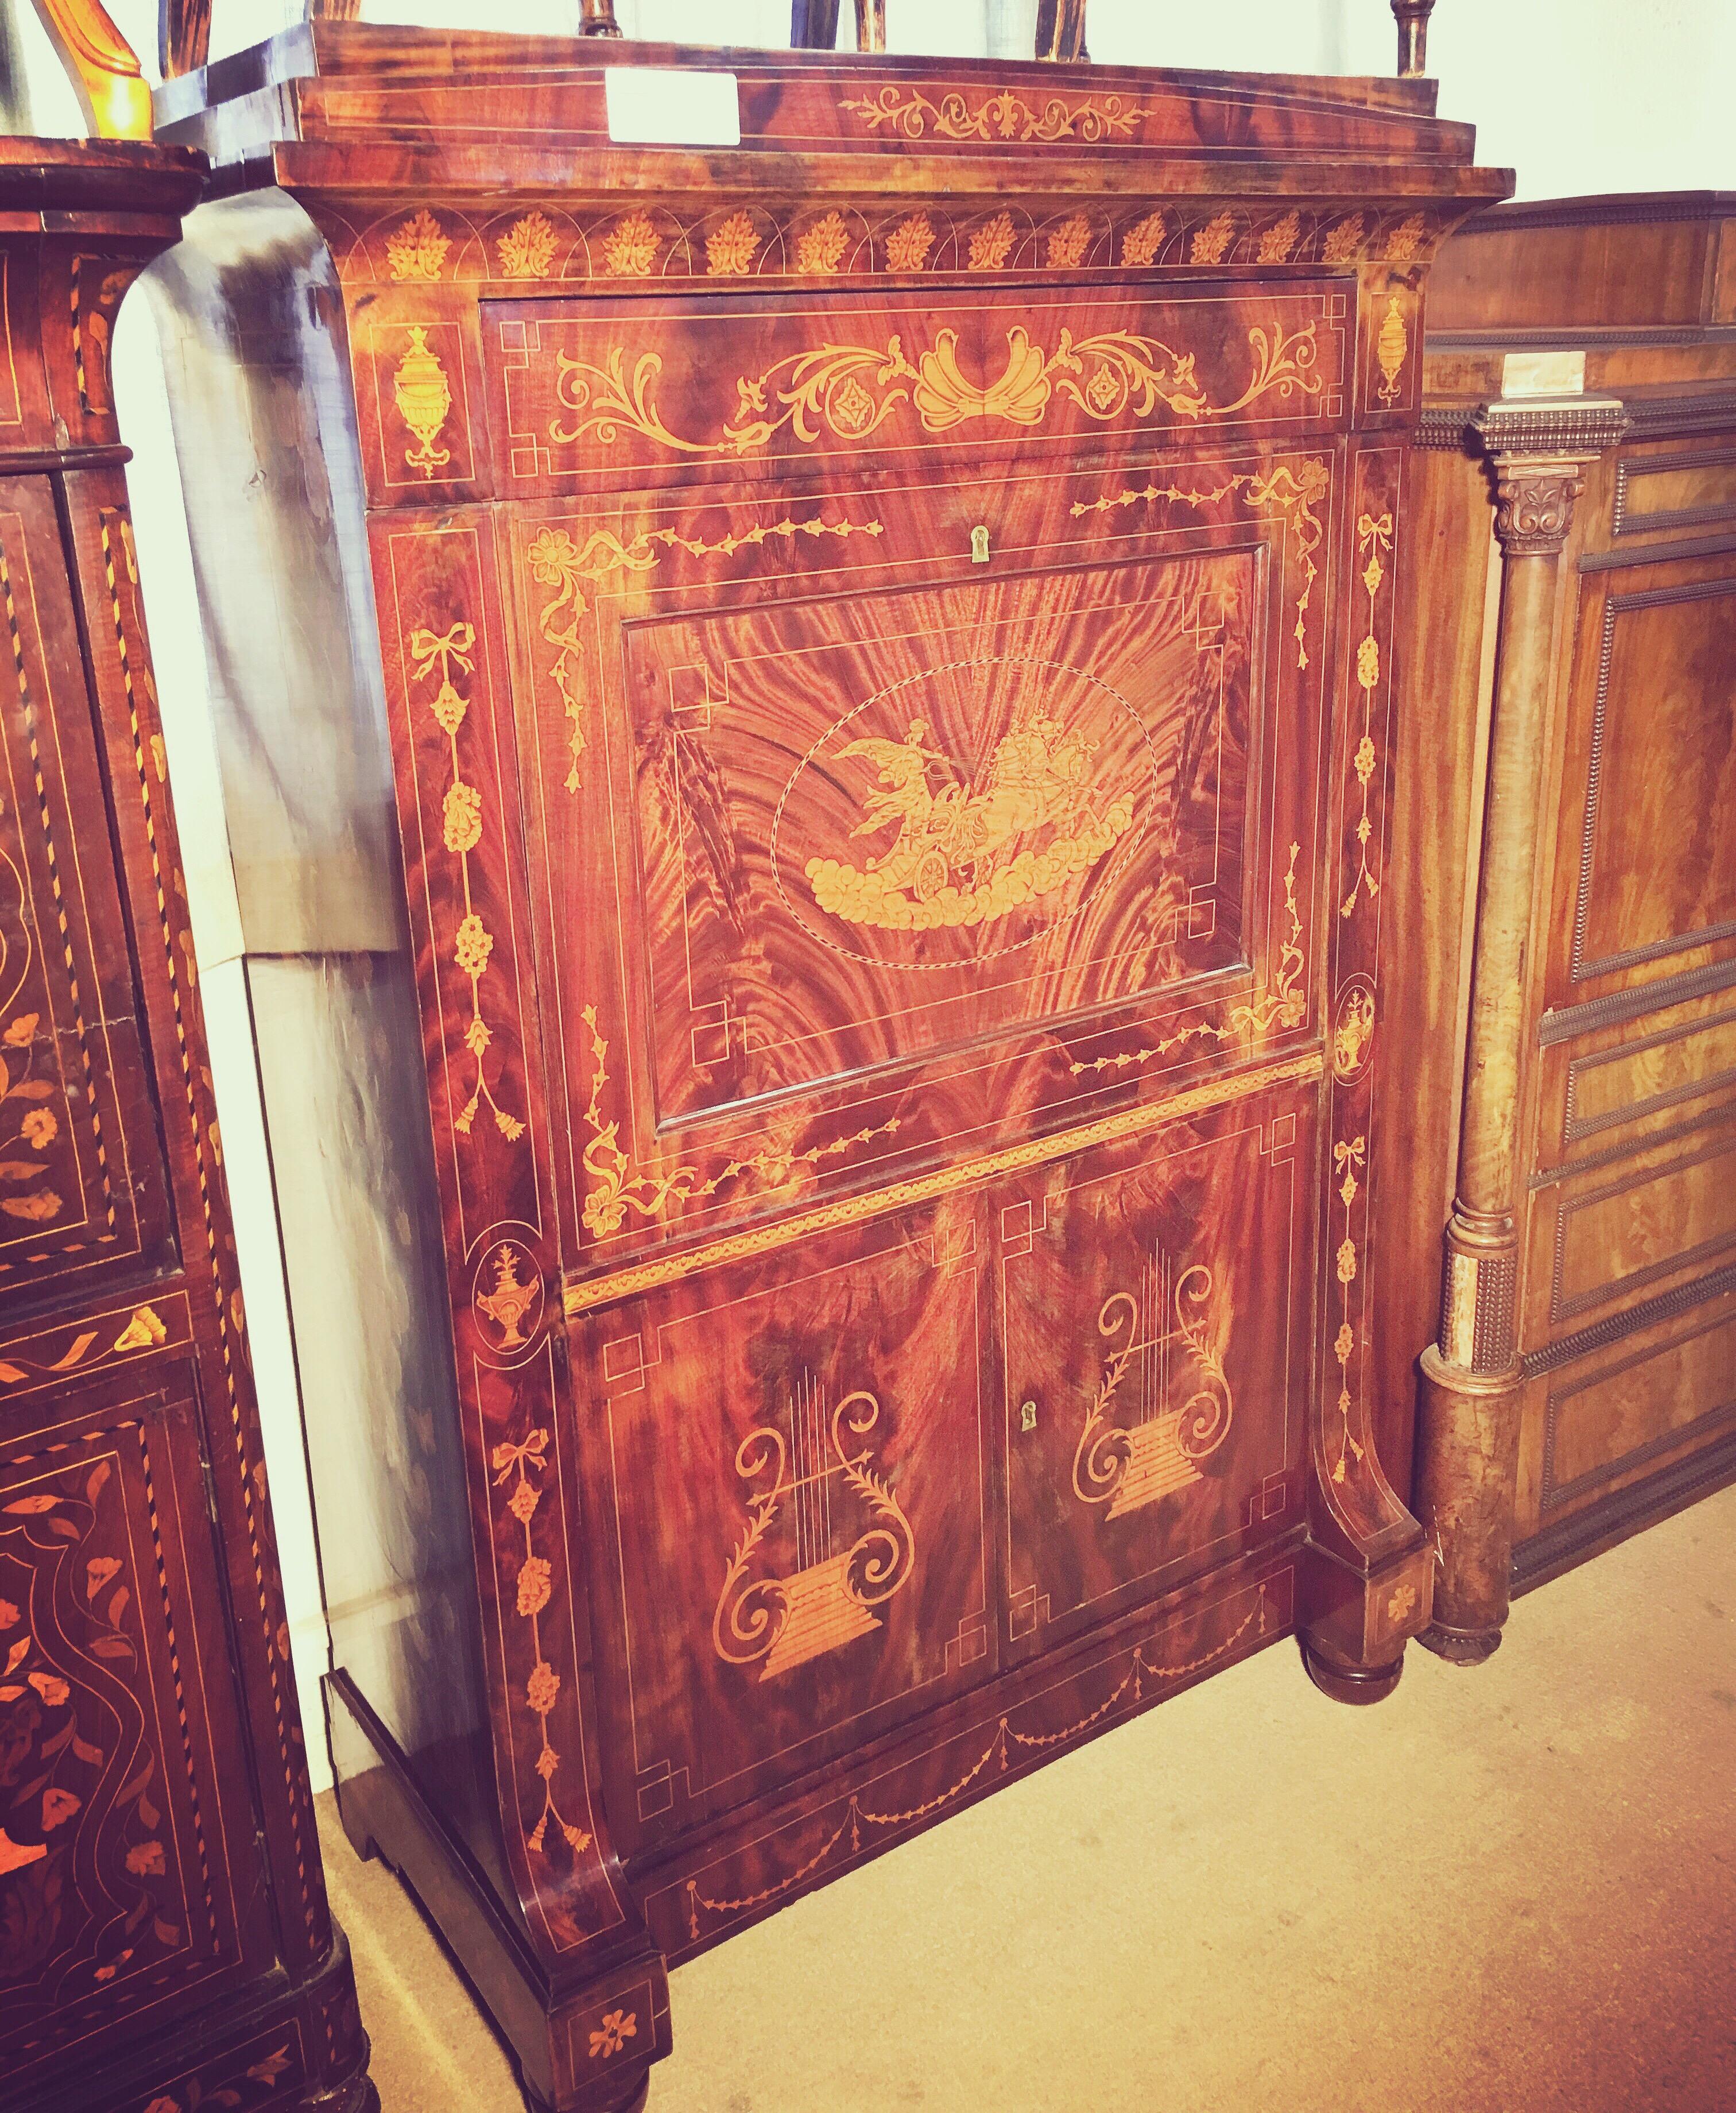 Fantastic Dutch secretaire in mahogany veneer. Rich decoration of inlays with motifs of urns, flower loops and horse carpets. Front with fold-down writing disc, two drawers and door pairs.
On the front with an inlay depicting Apollo on the chariot